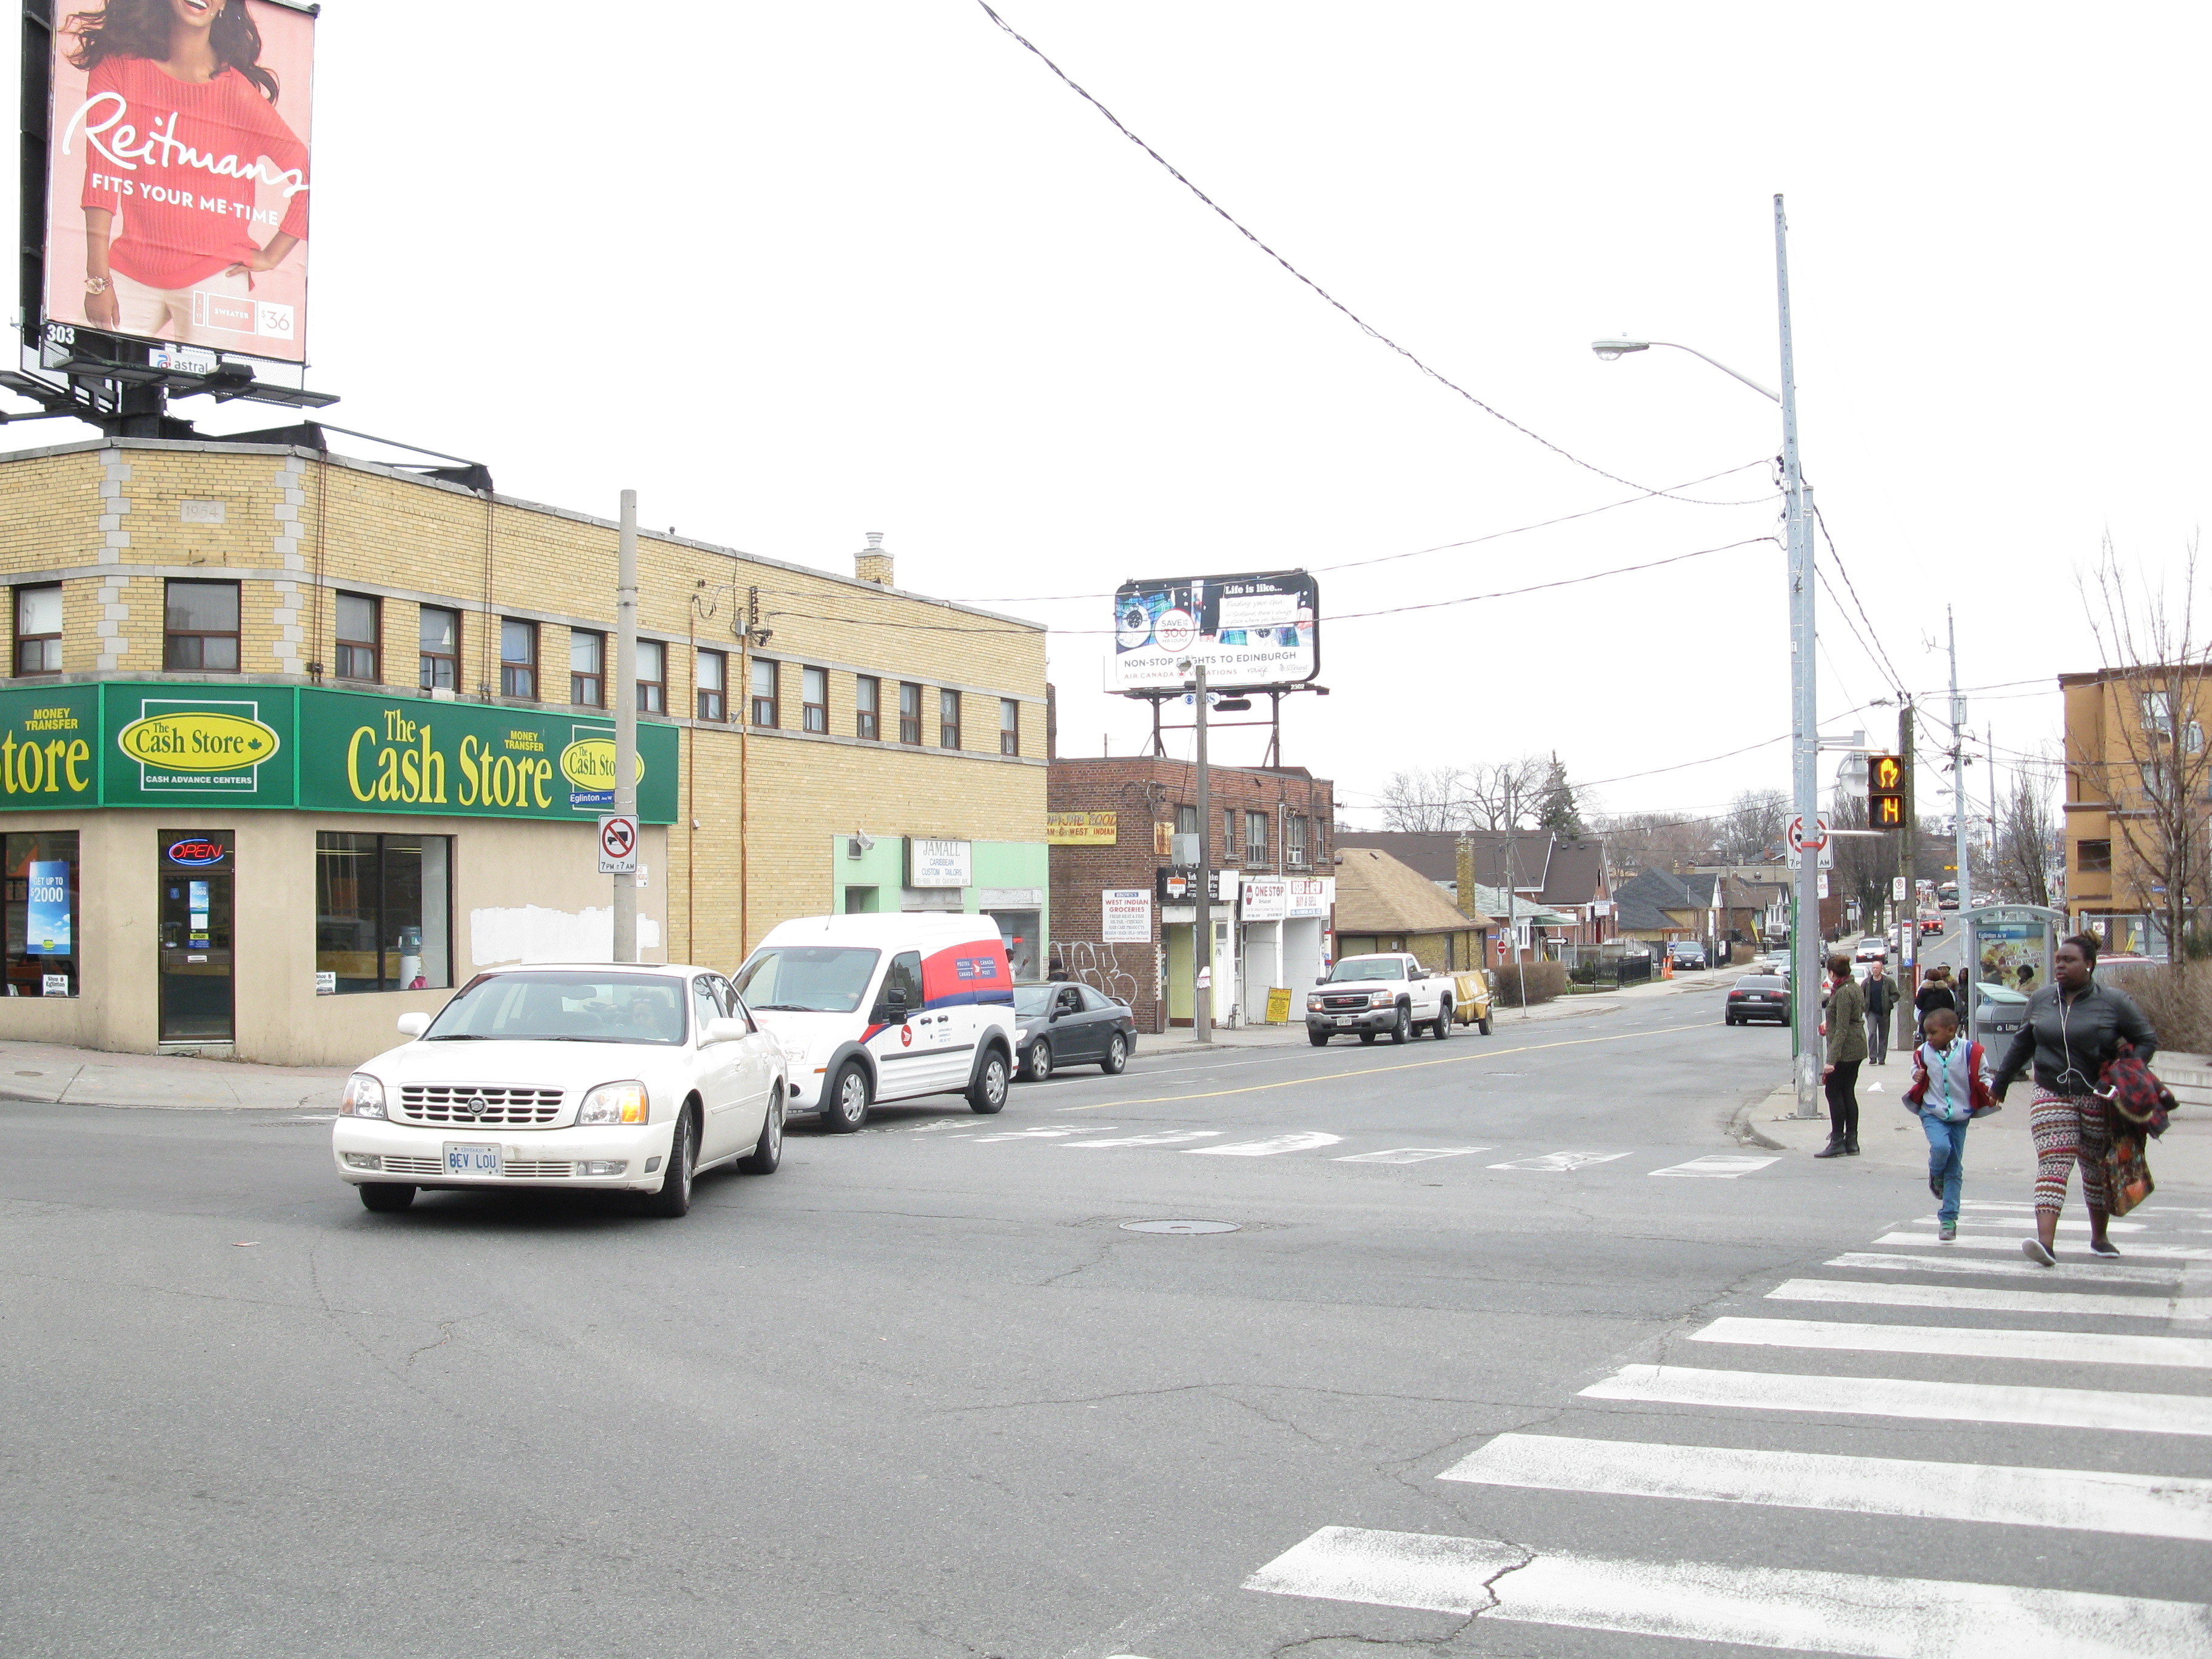 Intersection of oakwood and eglinton, 2013 04 09 -ad photo